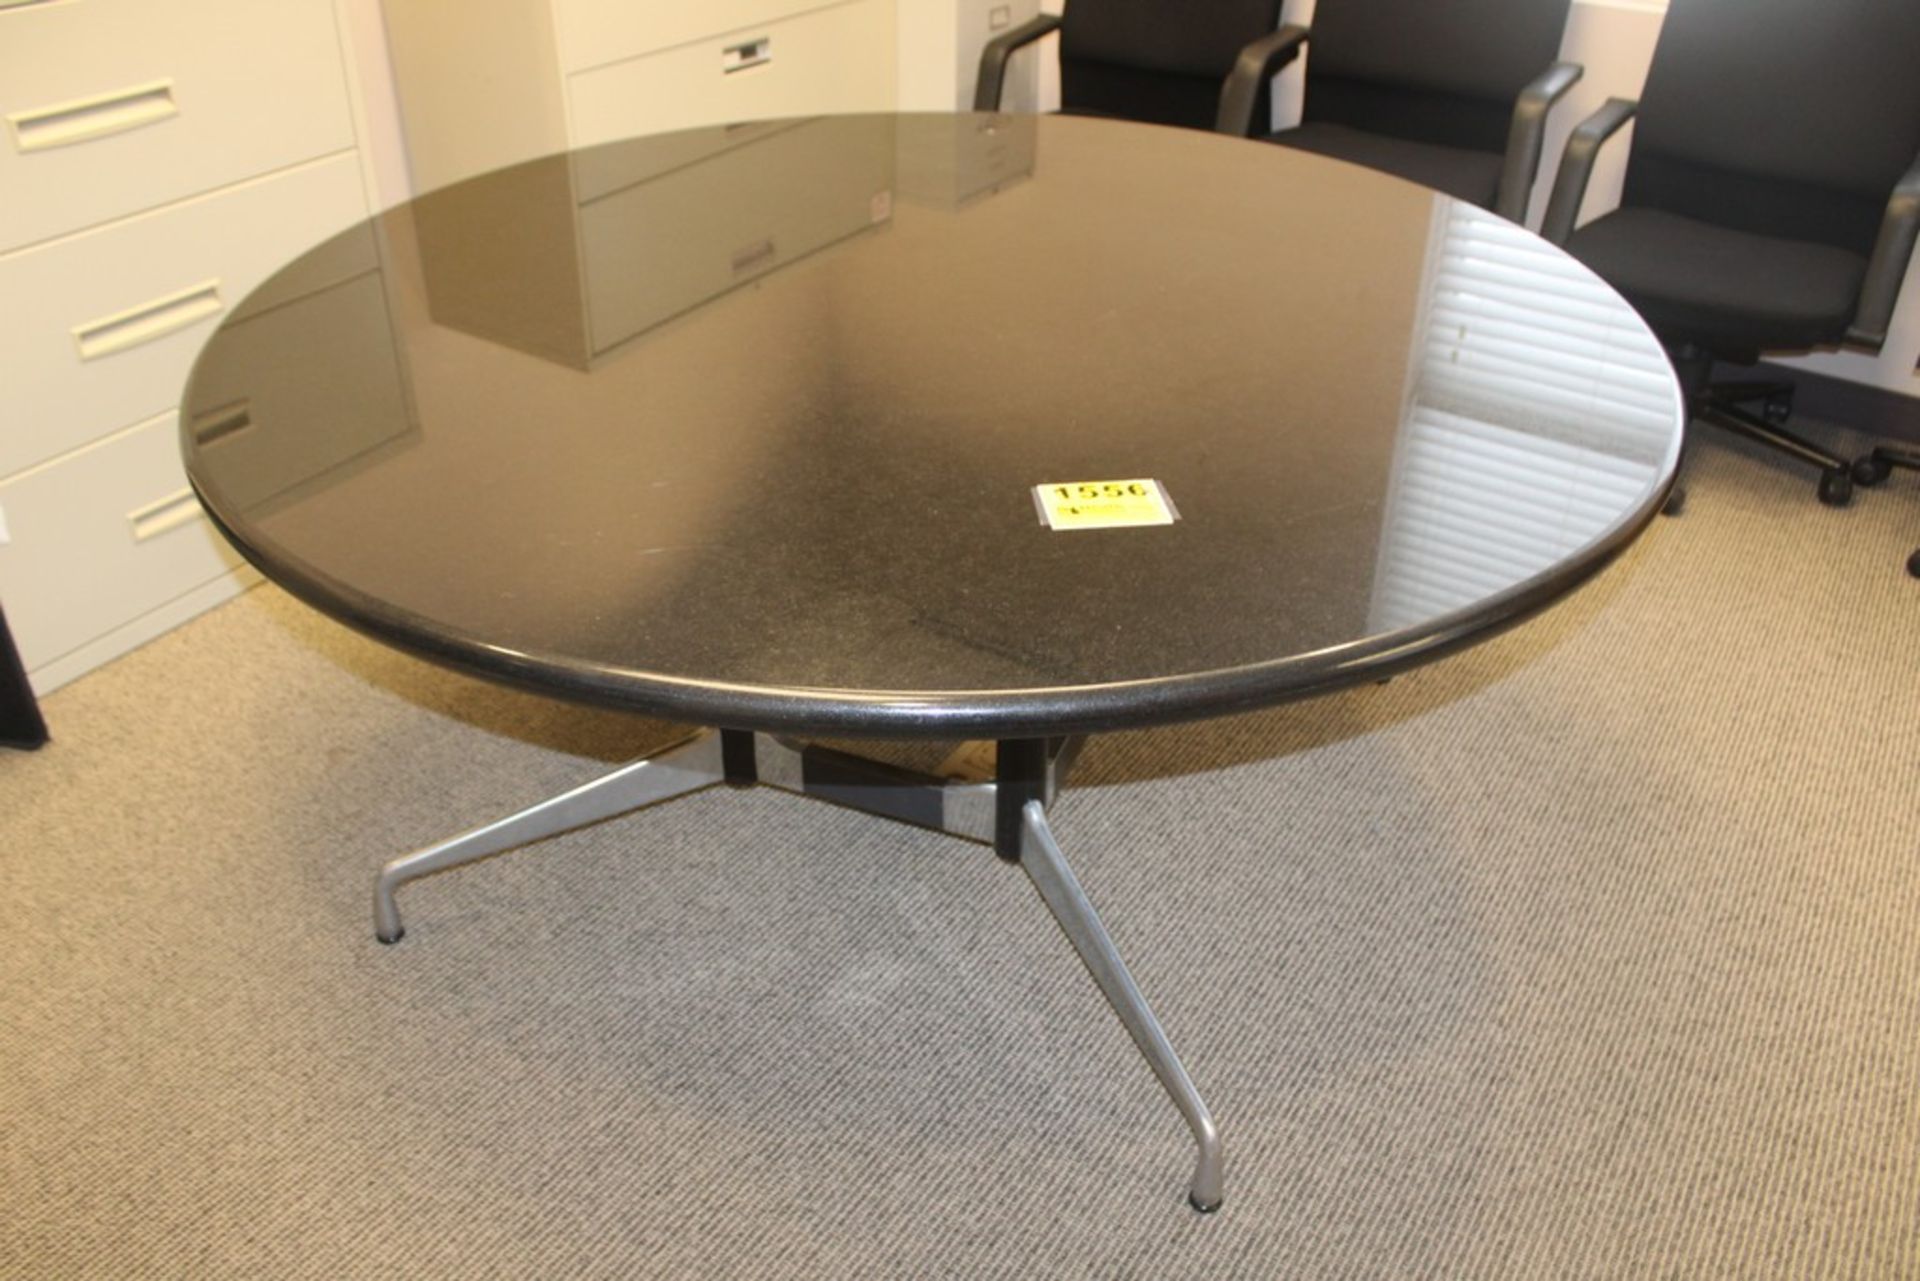 ROUND CONFERENCE TABLE, 66", WITH (4) CLOTH ARMCHAIRS WITH CASTERS - Image 2 of 3